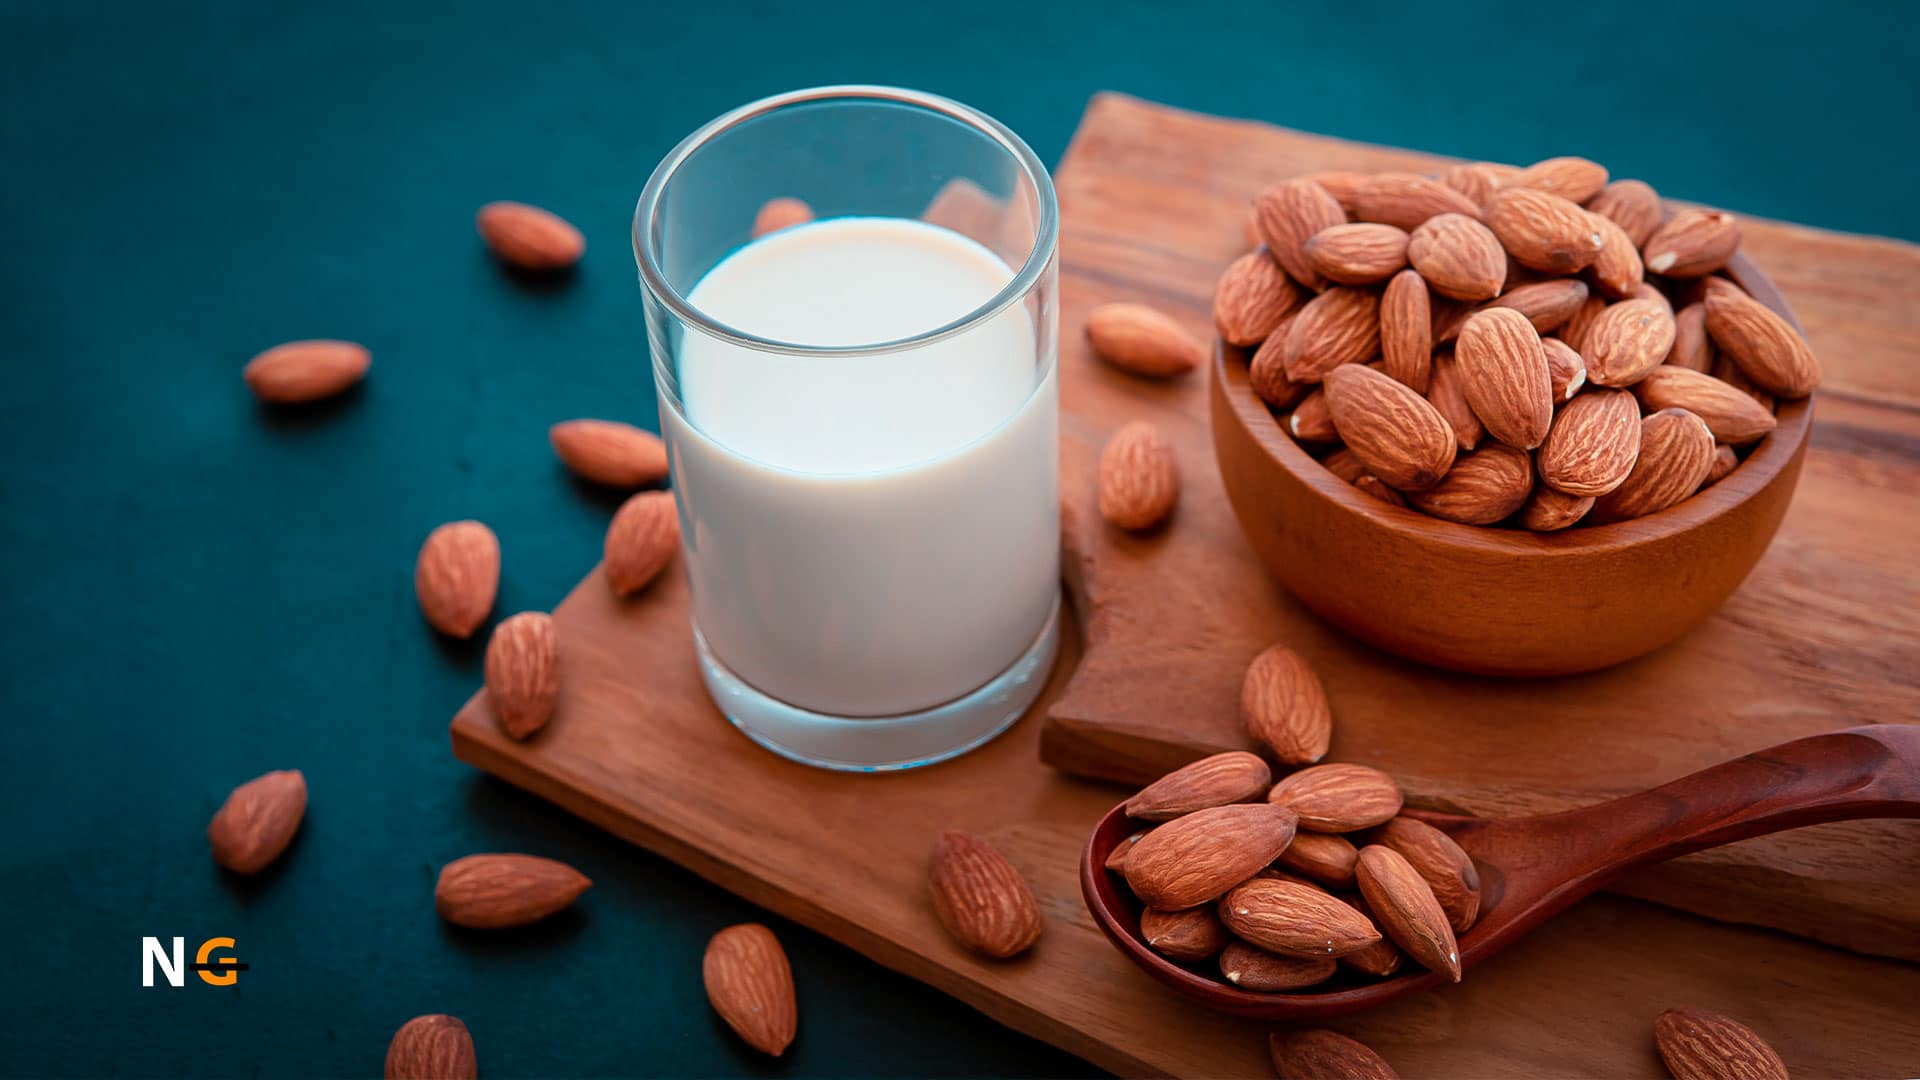 What Is Almond Milk Made Of